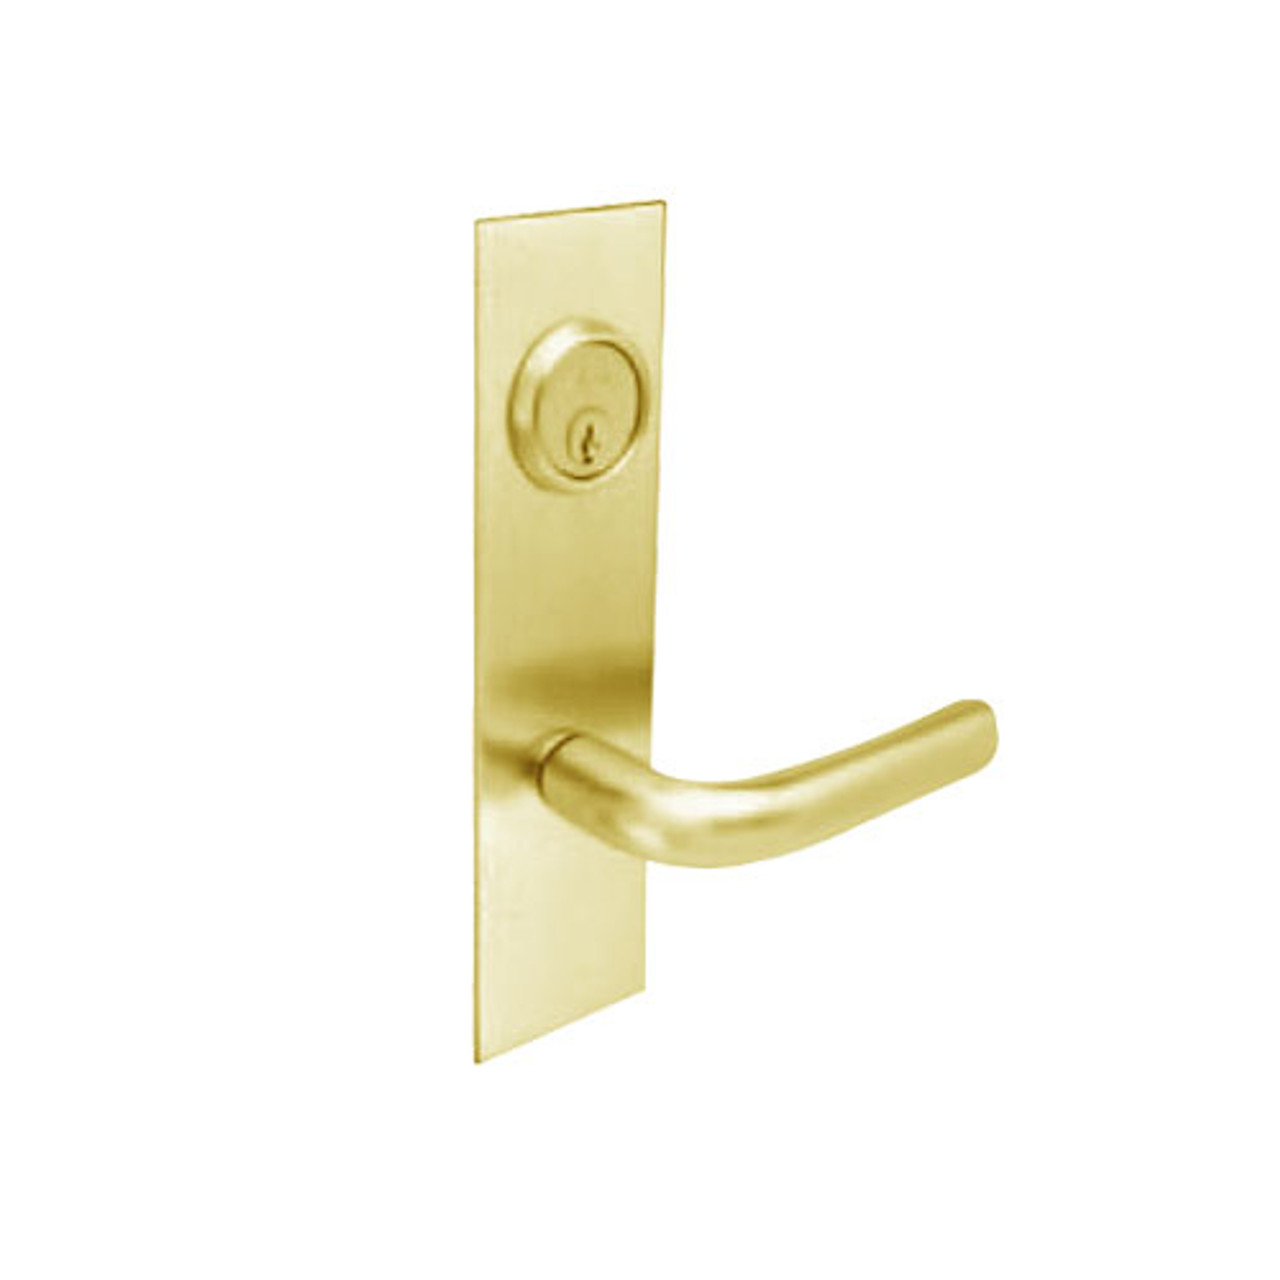 BM01-NH-04 Arrow Mortise Lock BM Series Passage Lever with Neo Design and H Escutcheon in Satin Brass